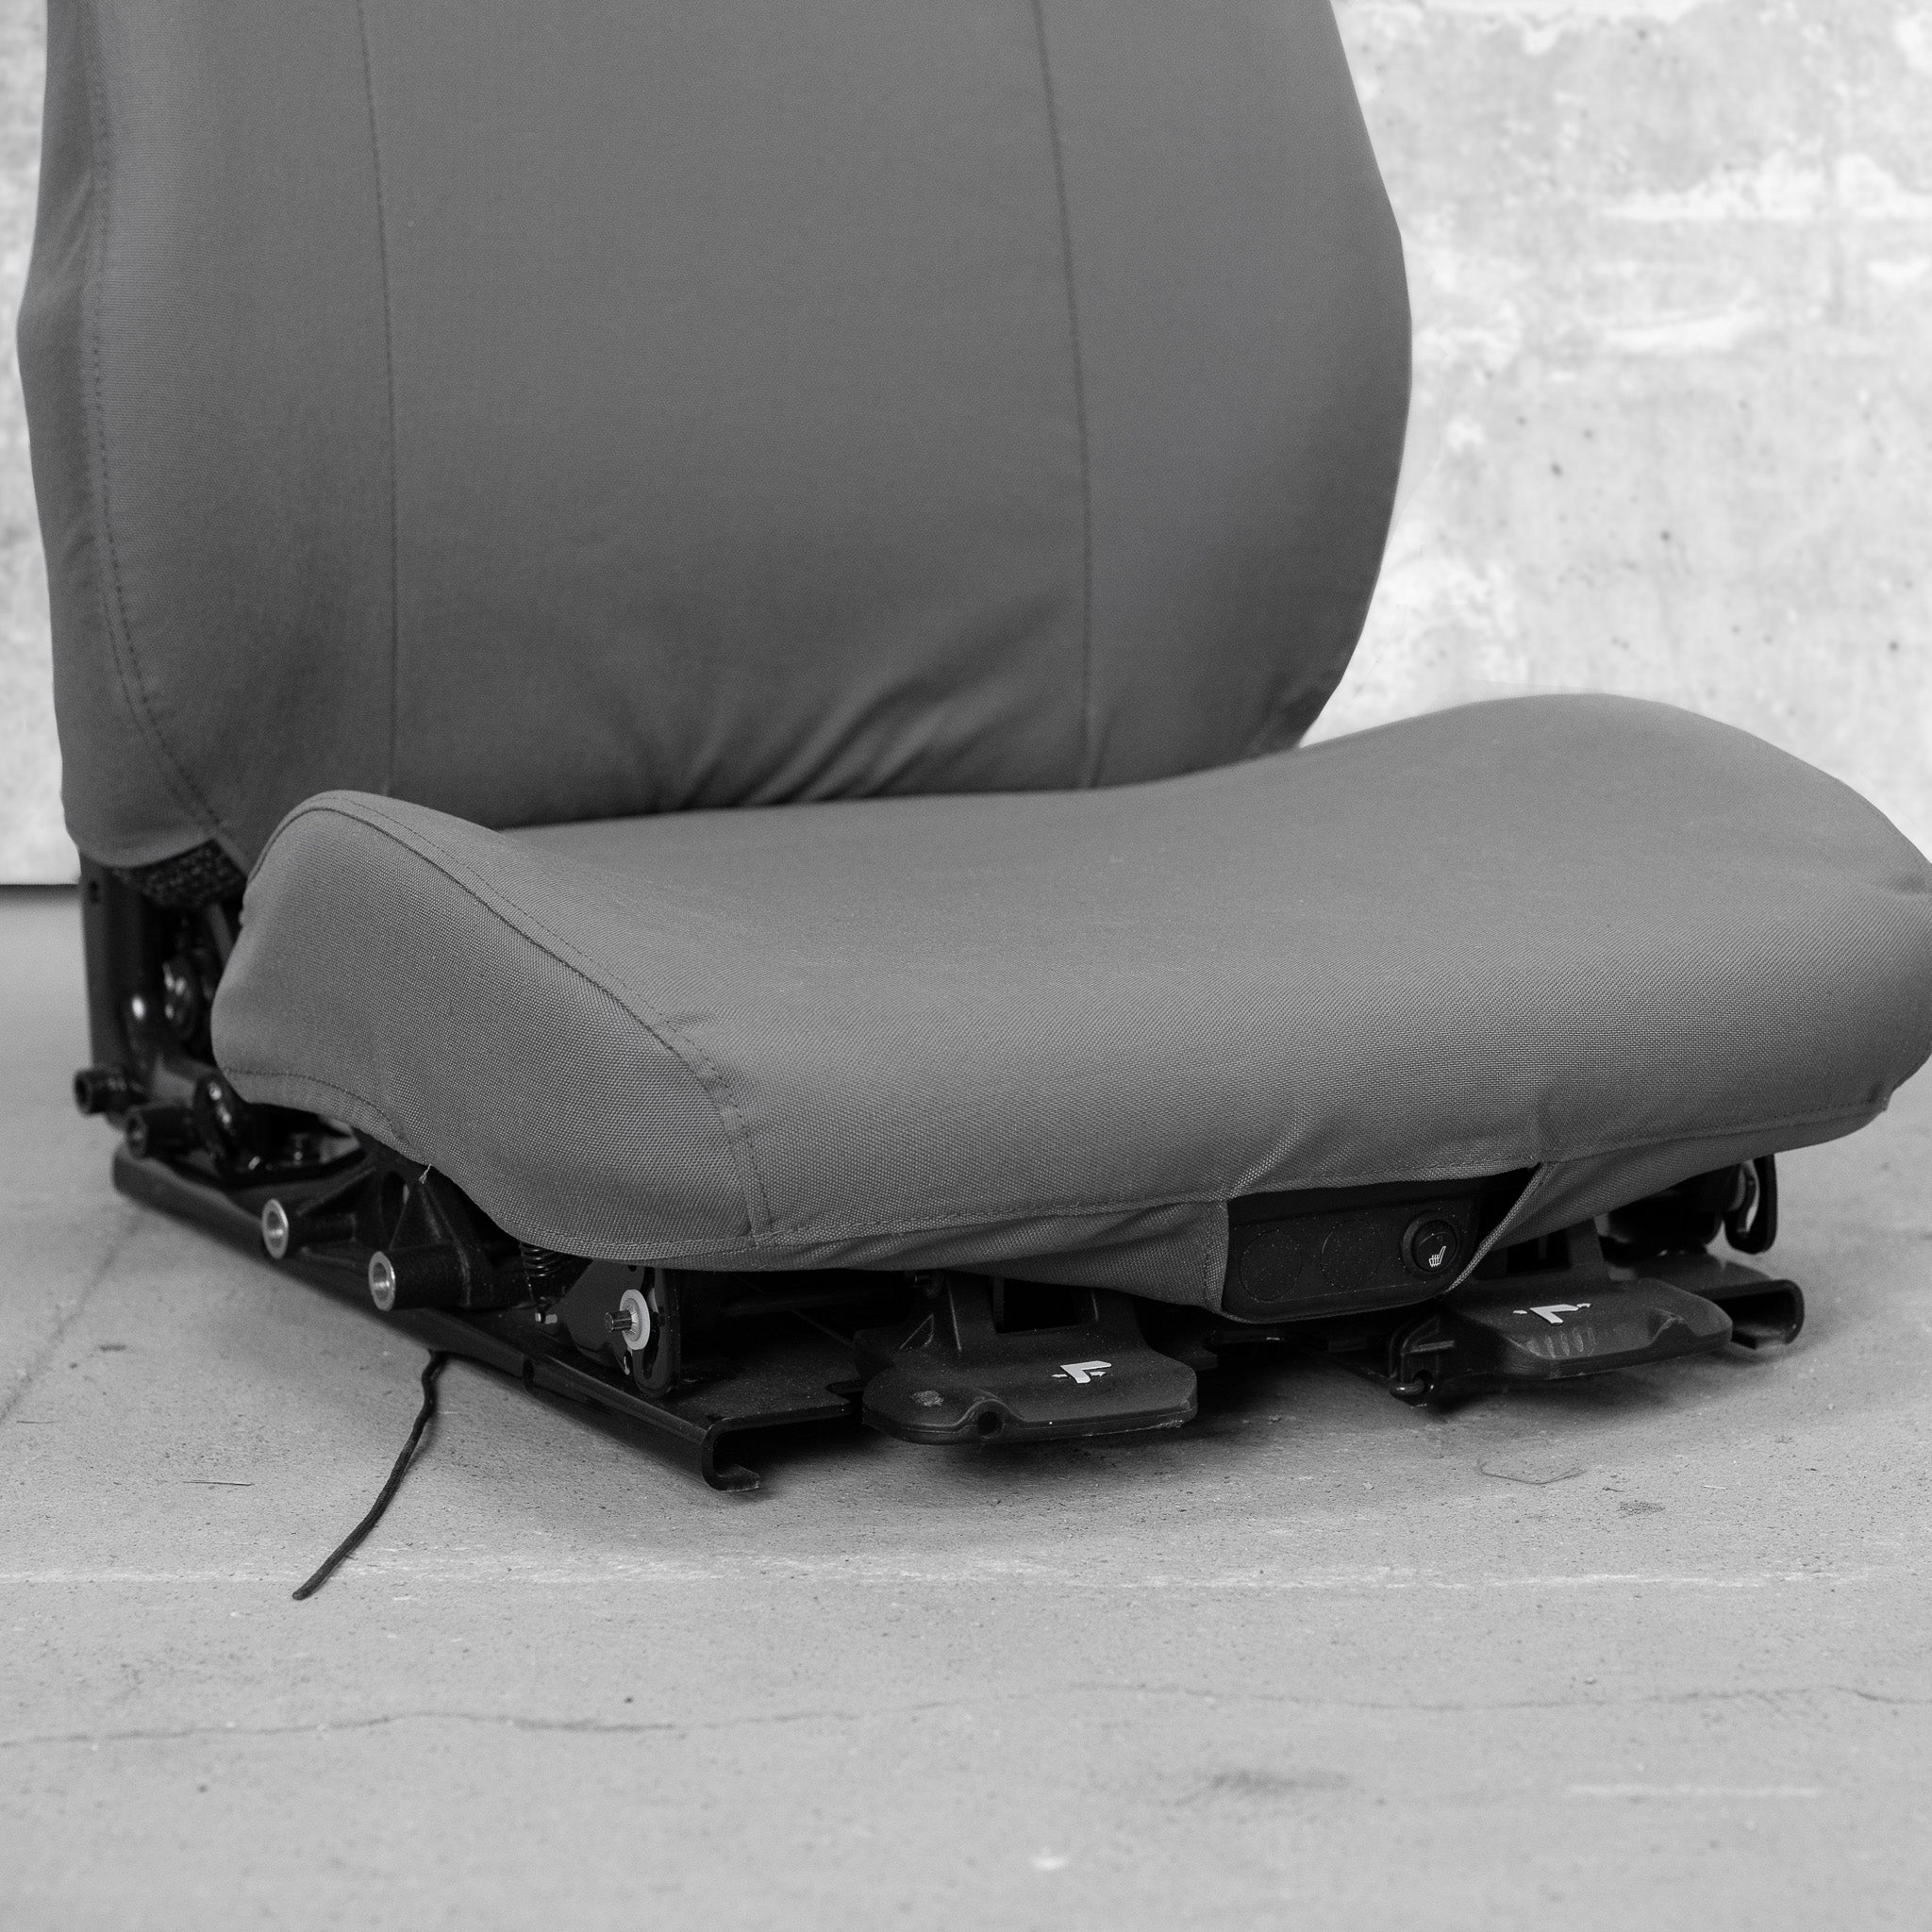 This is a close-up of the front seat bottom of a TigerTough heavy equipment seat cover. You can see how the seat cover works around the front seat controls.